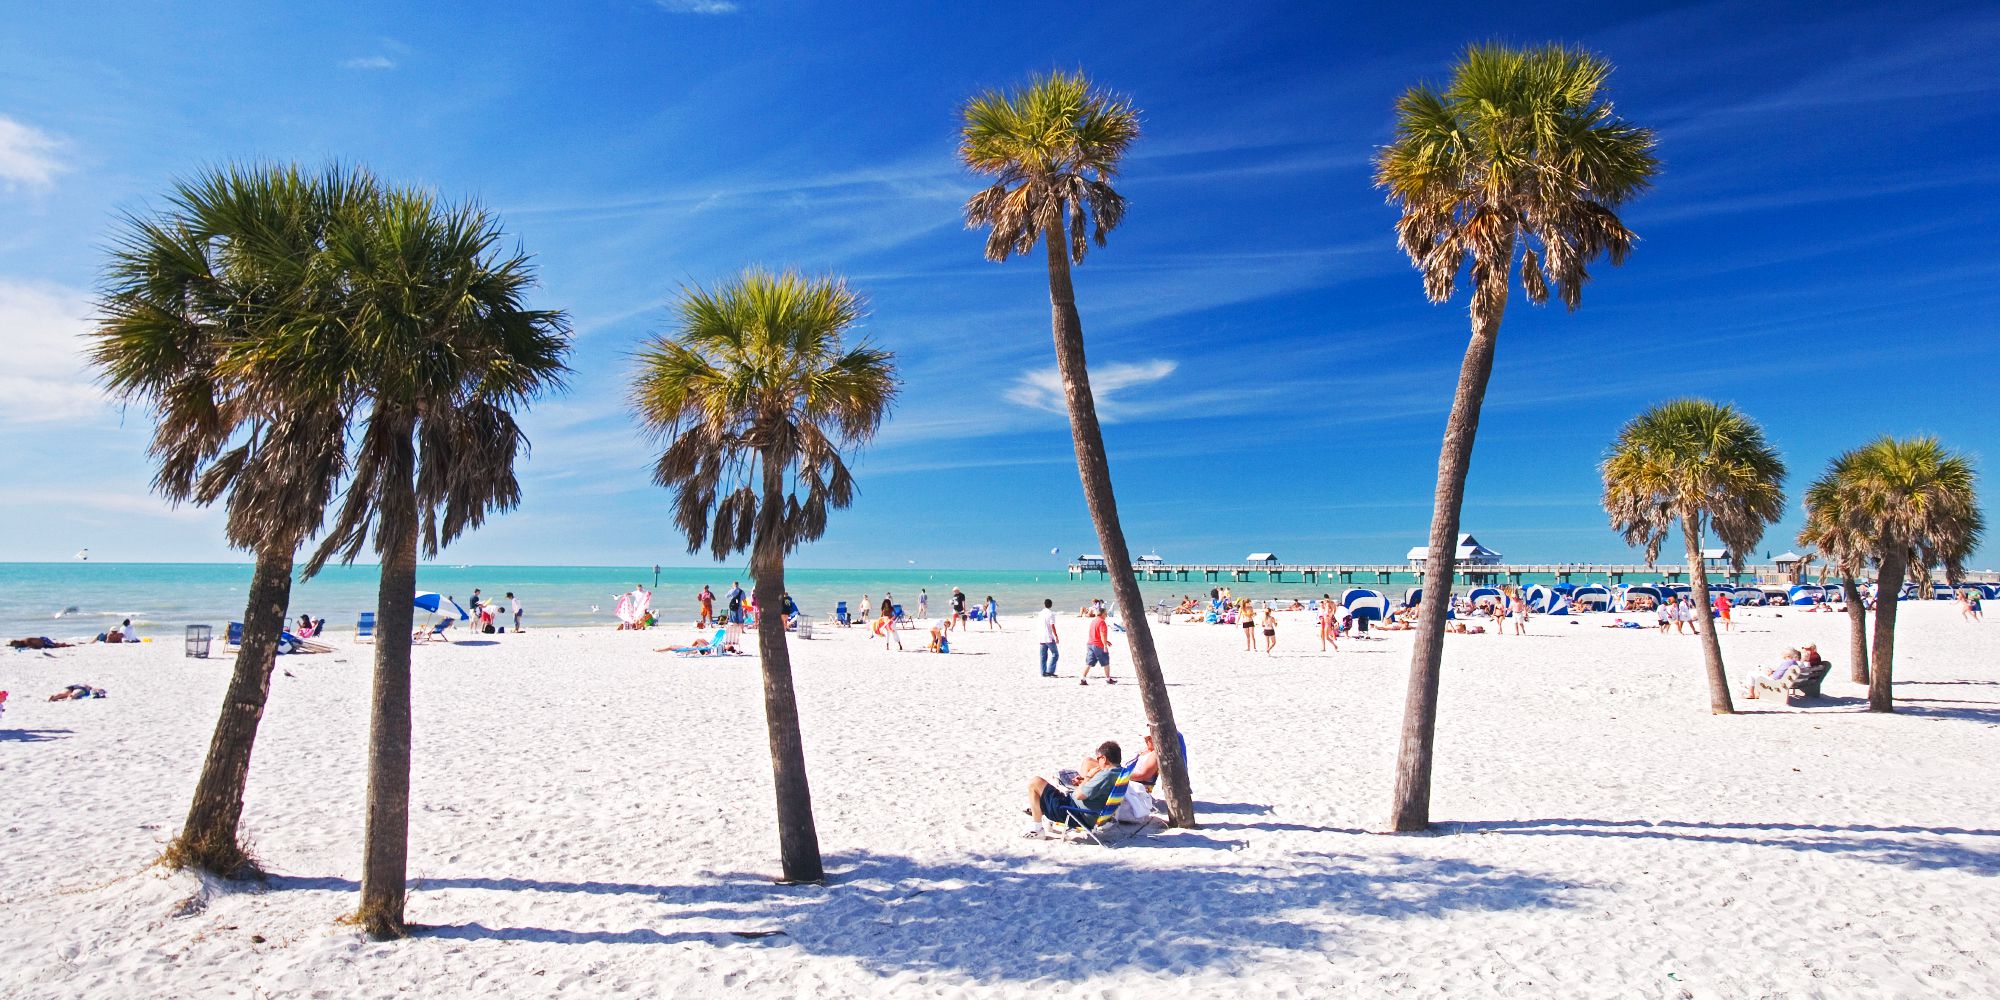 14 Best Florida Beaches of 2018 - Most Beautiful Beaches in Florida